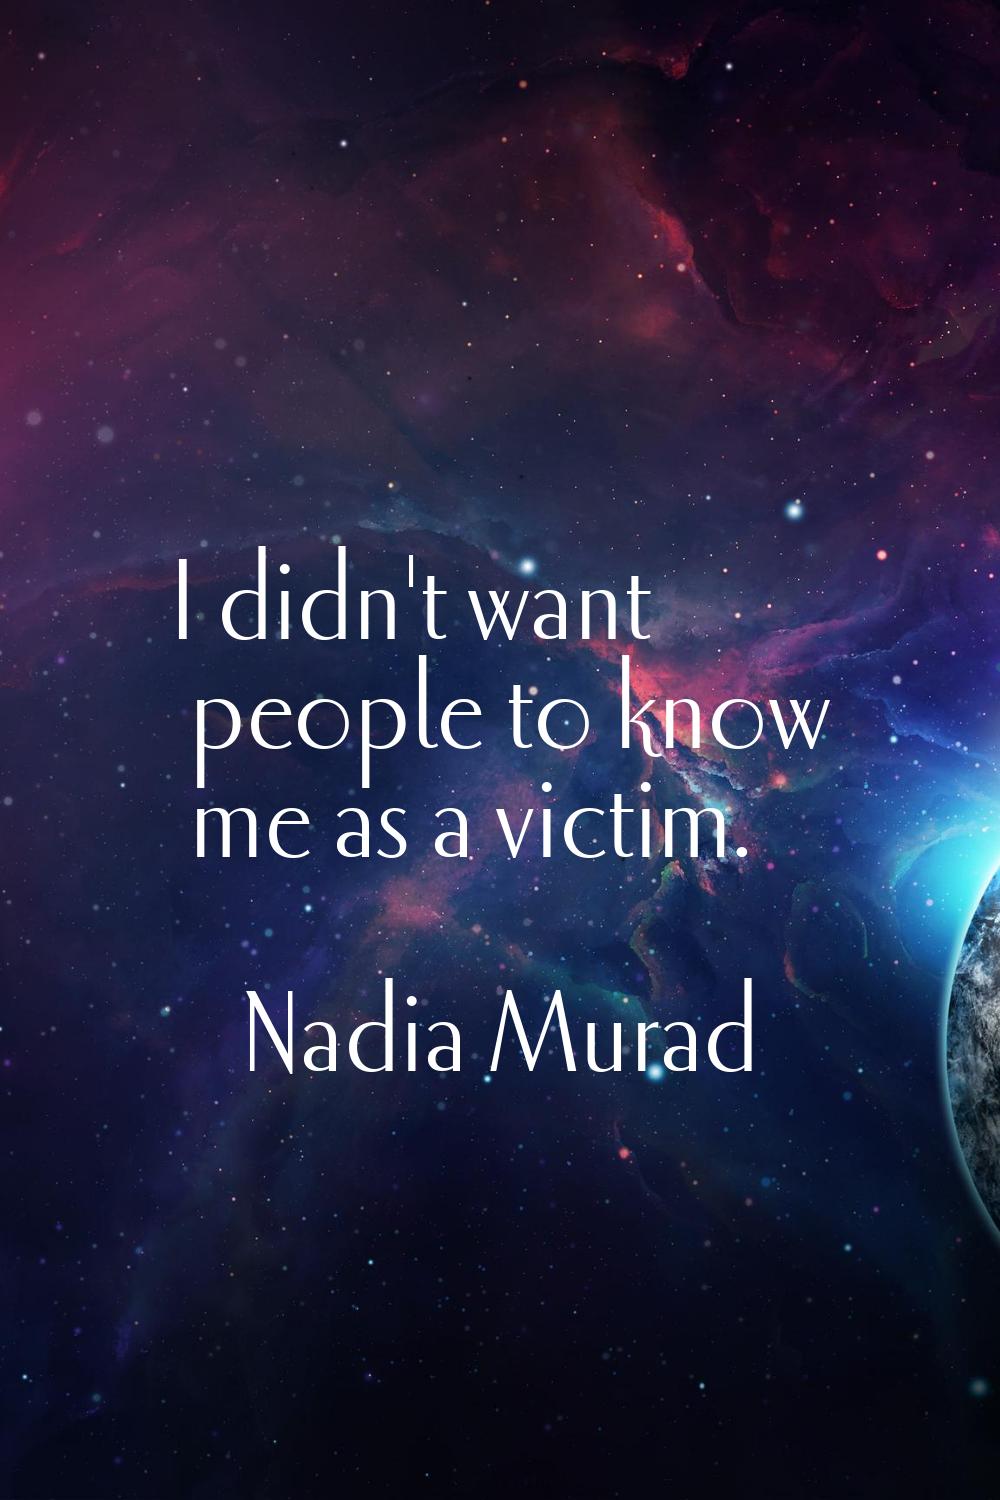 I didn't want people to know me as a victim.